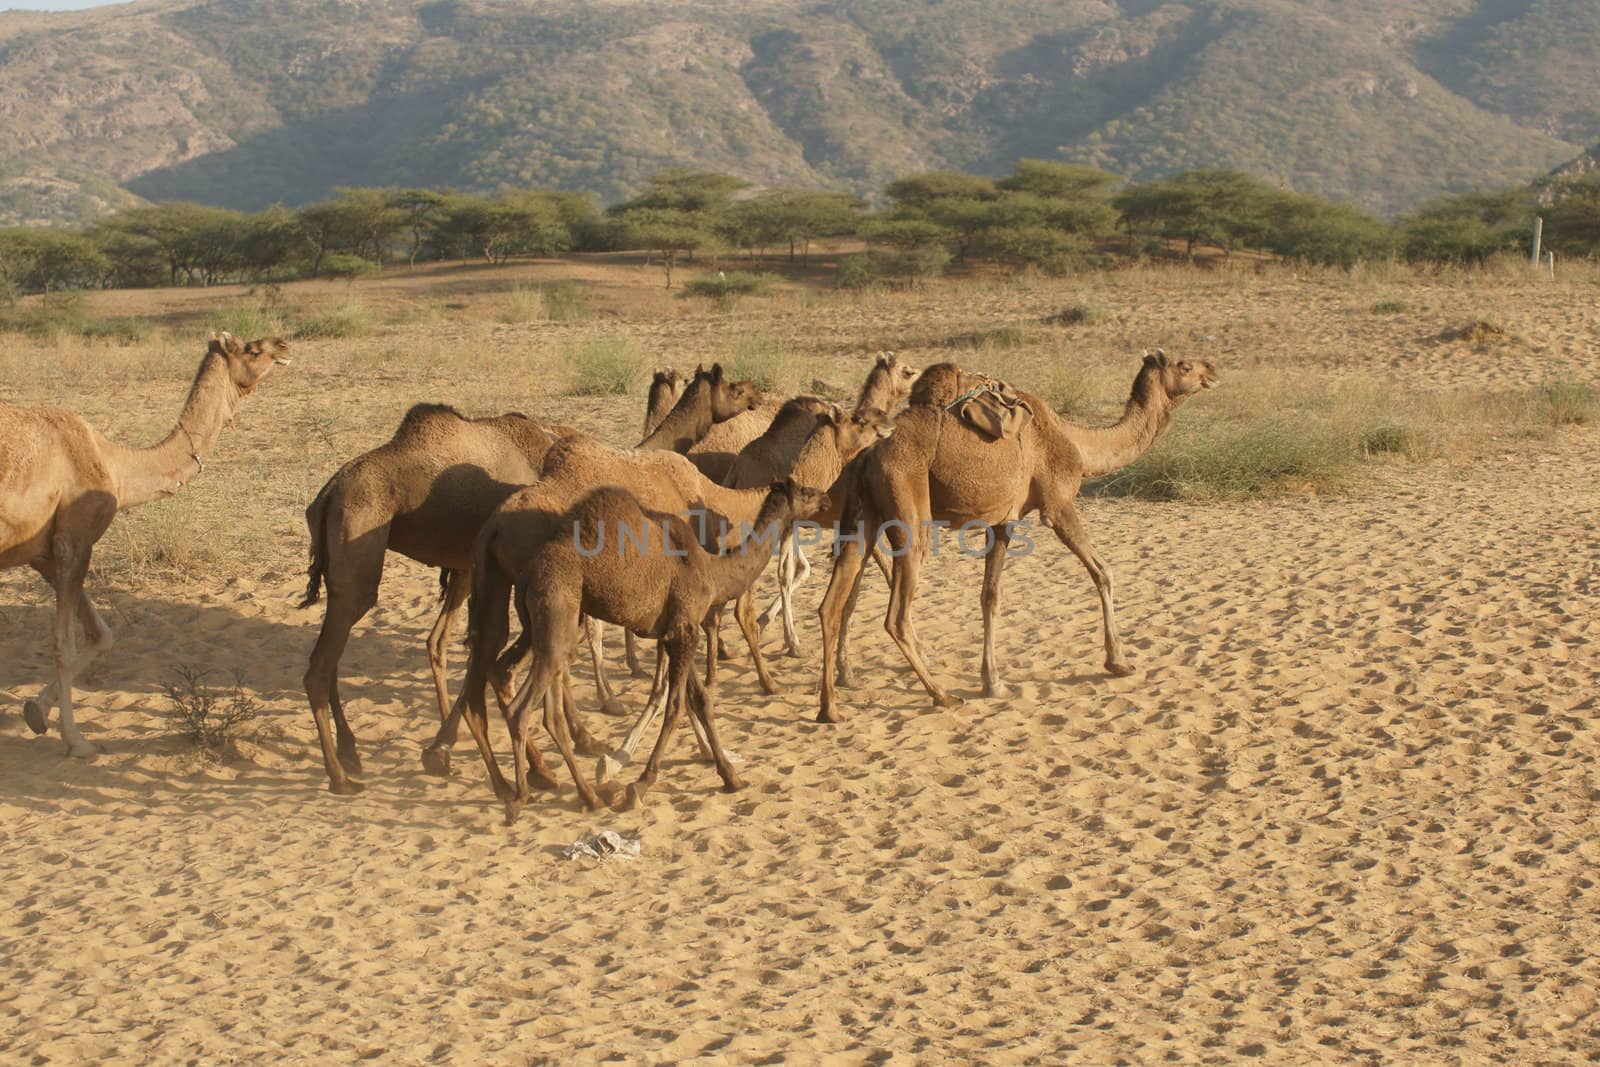 Group of camels crossing sandy desert at the Pushkar Fair in Rajasthan, India